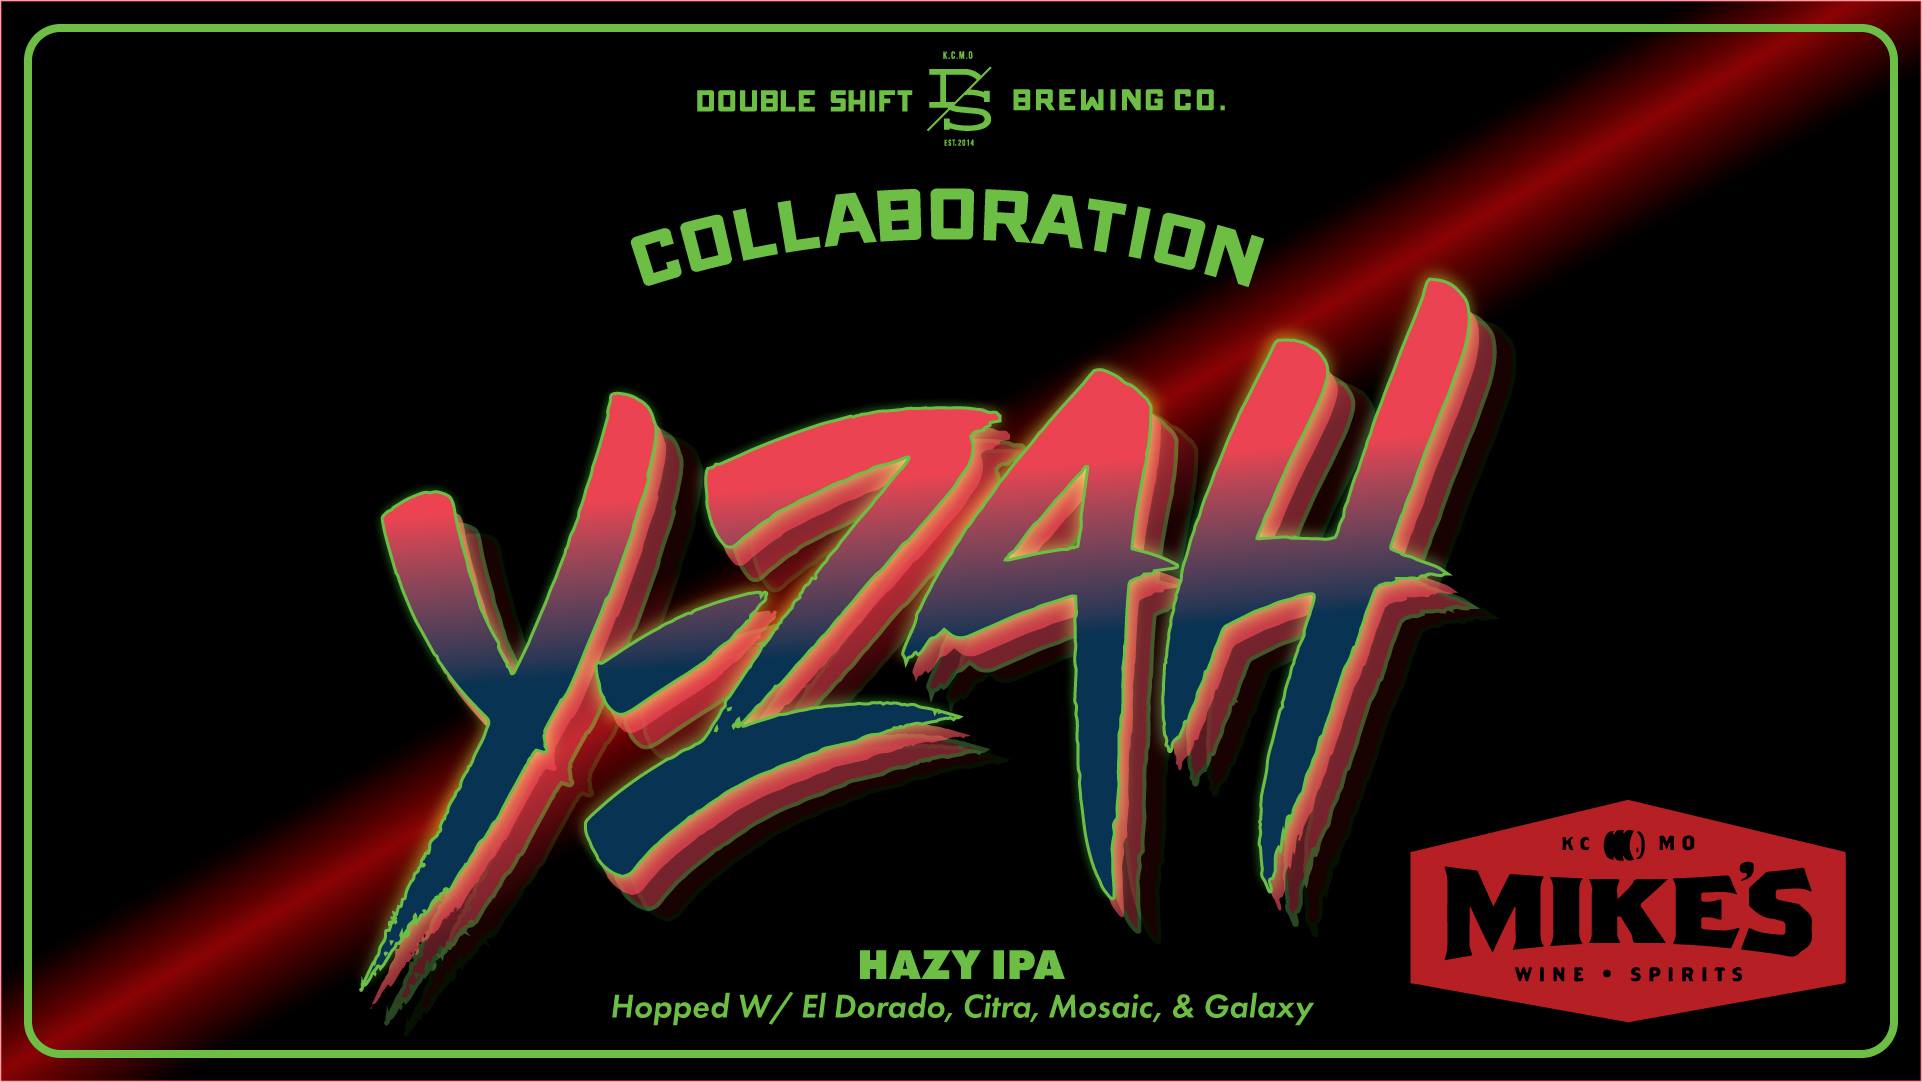 Y-Zah is a new collaboration IPA